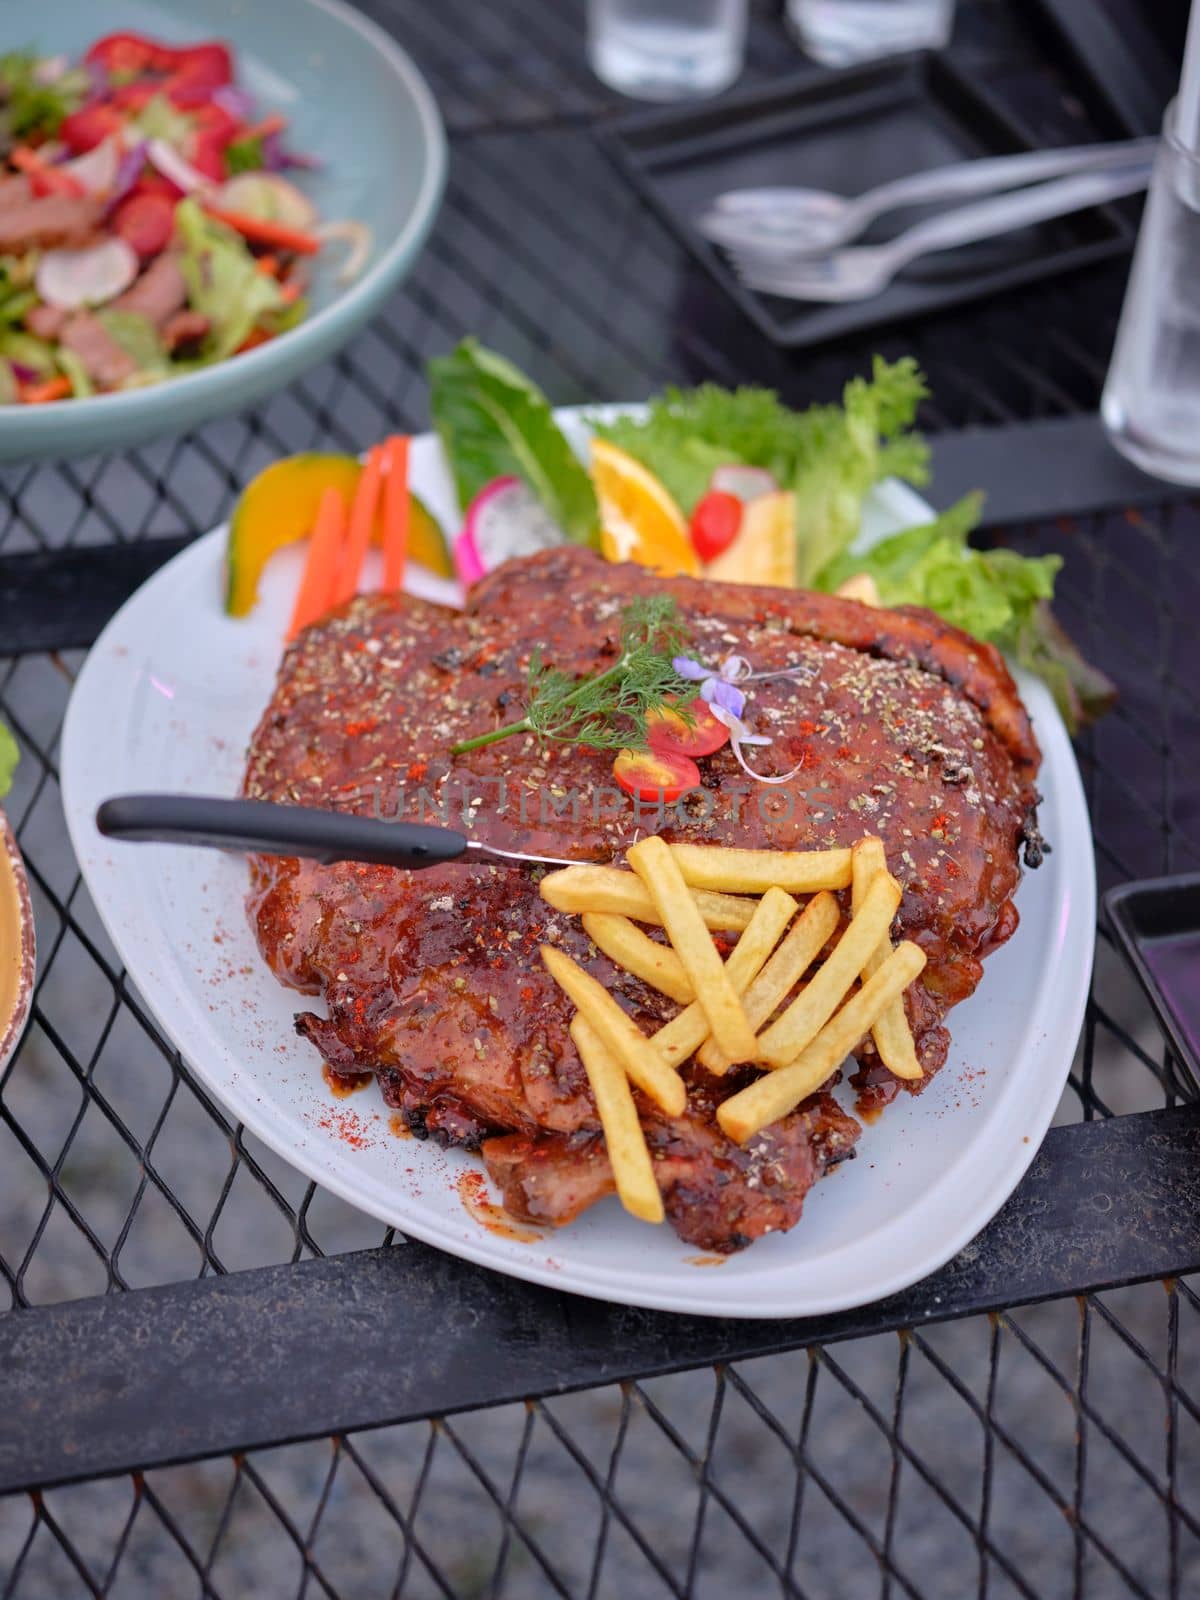 Grilled pork ribs with french fries on dish